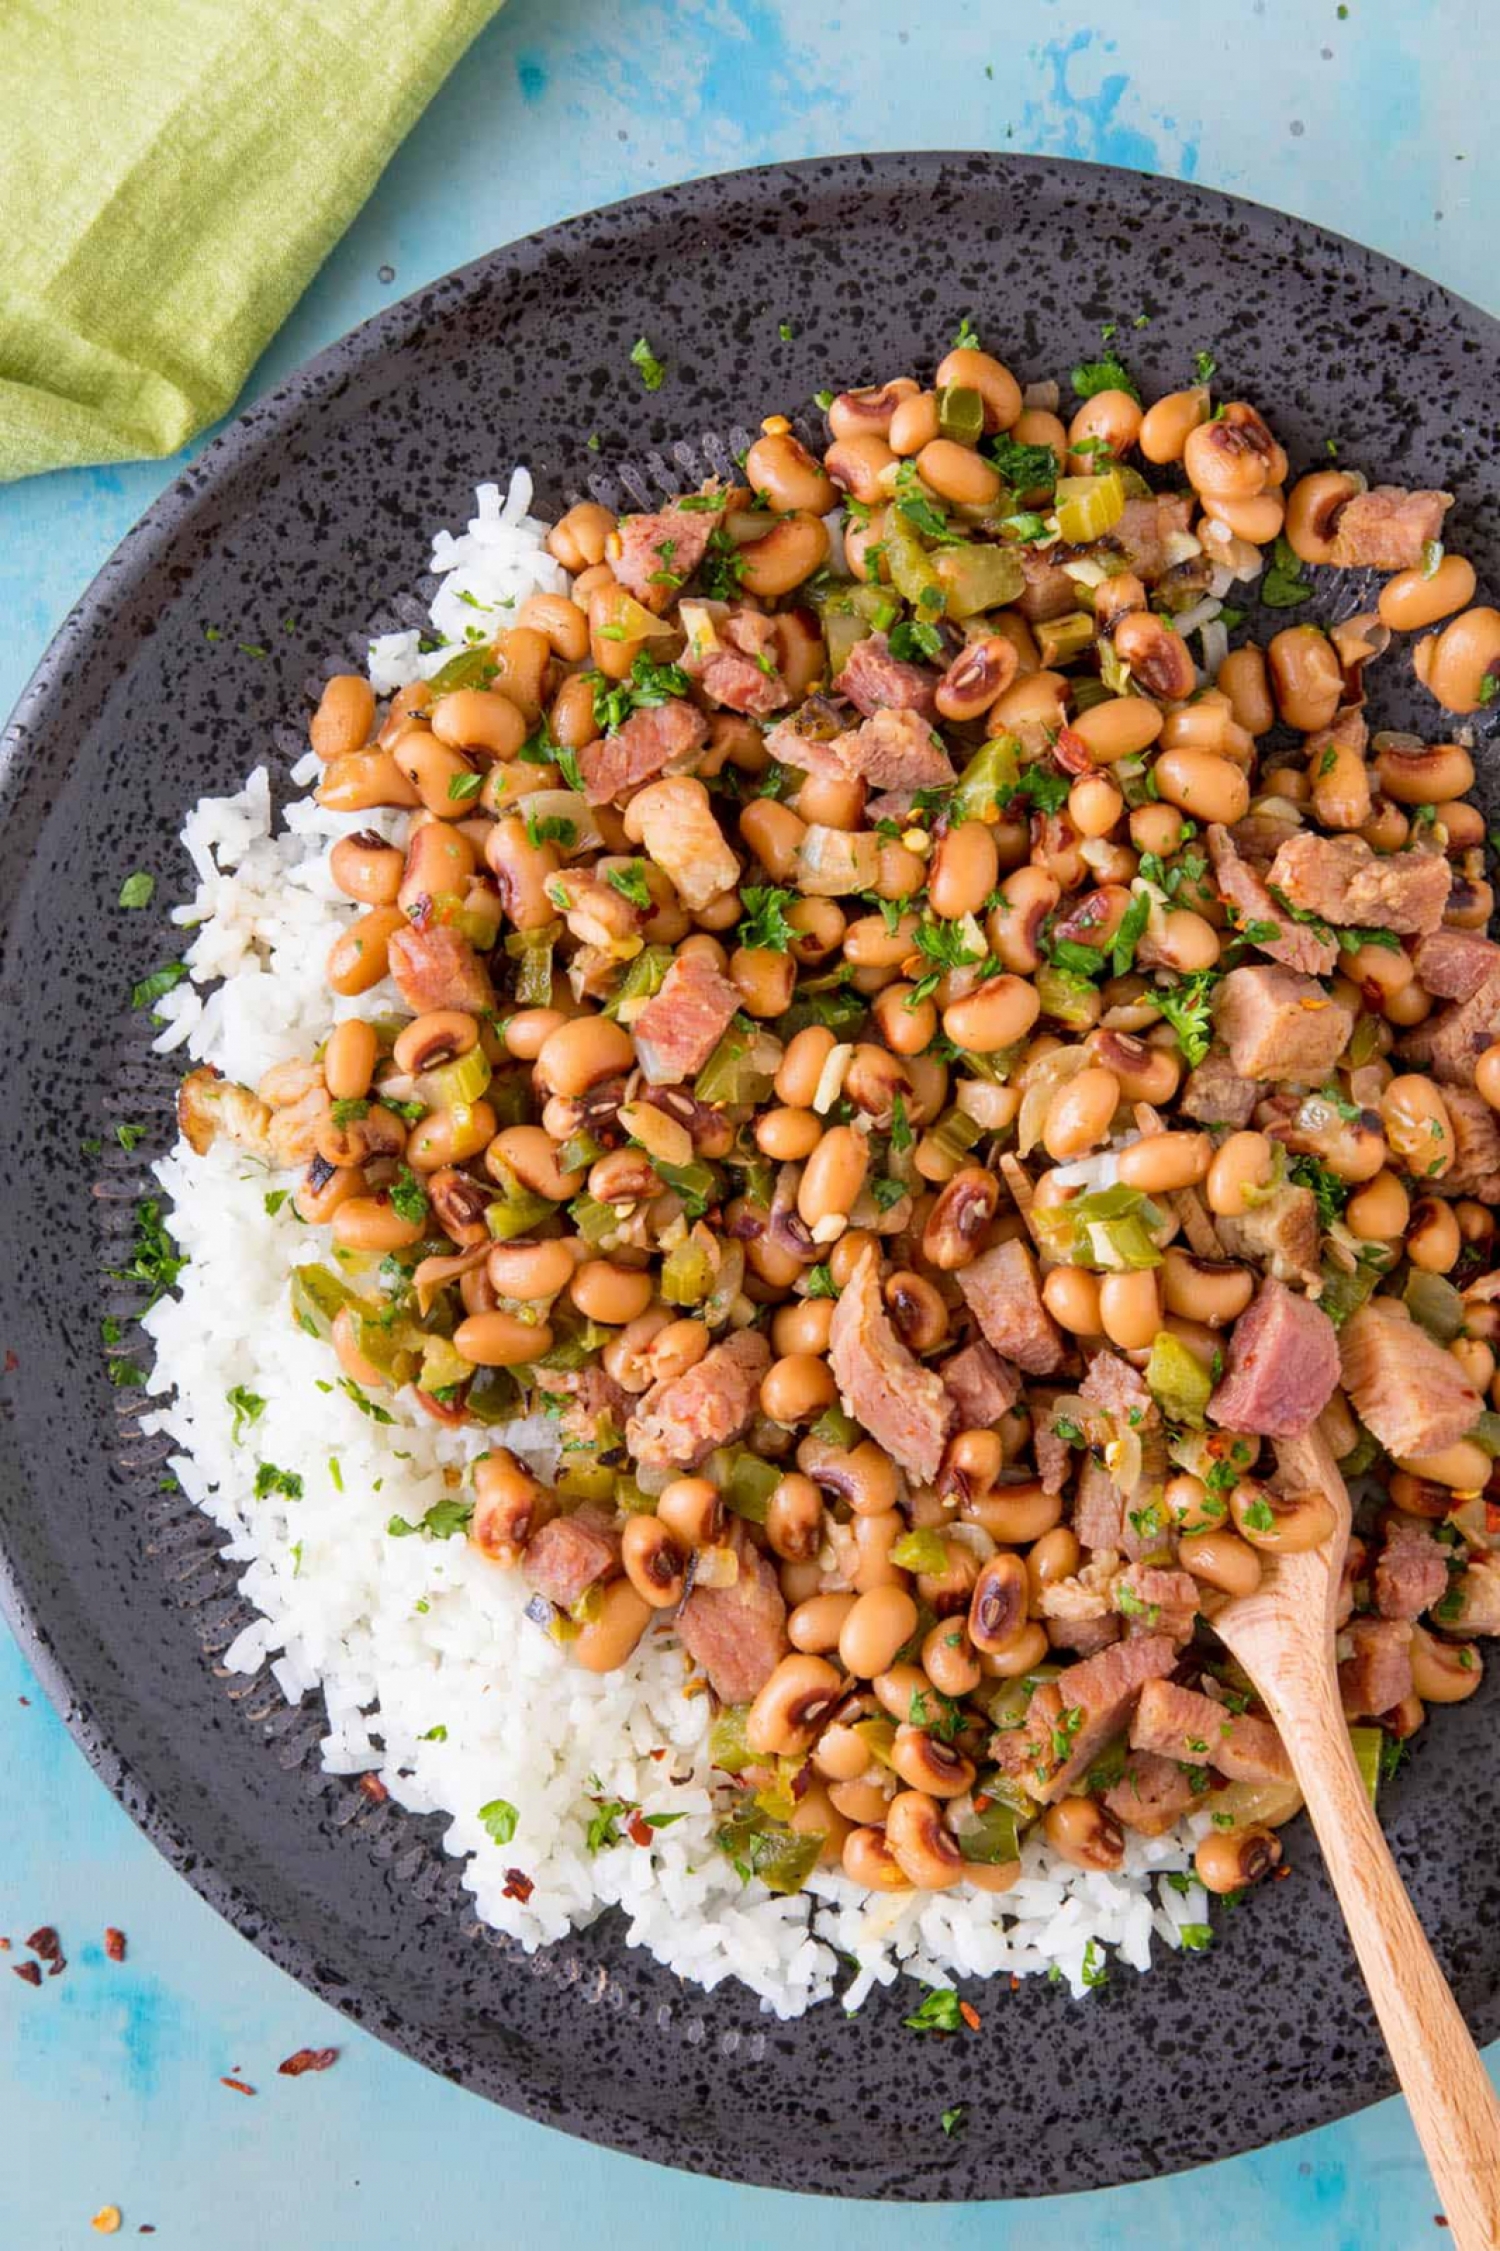 <p>This simple black-eyed pea and ham stew is a traditional New Year's dish in the South that's so good you'll want to eat it all year long! Serve it over rice or with crusty bread to soak up all the savory broth. <a href="https://www.chilipeppermadness.com/recipes/hoppin-john/" rel="noopener">Get the recipe here.</a></p>